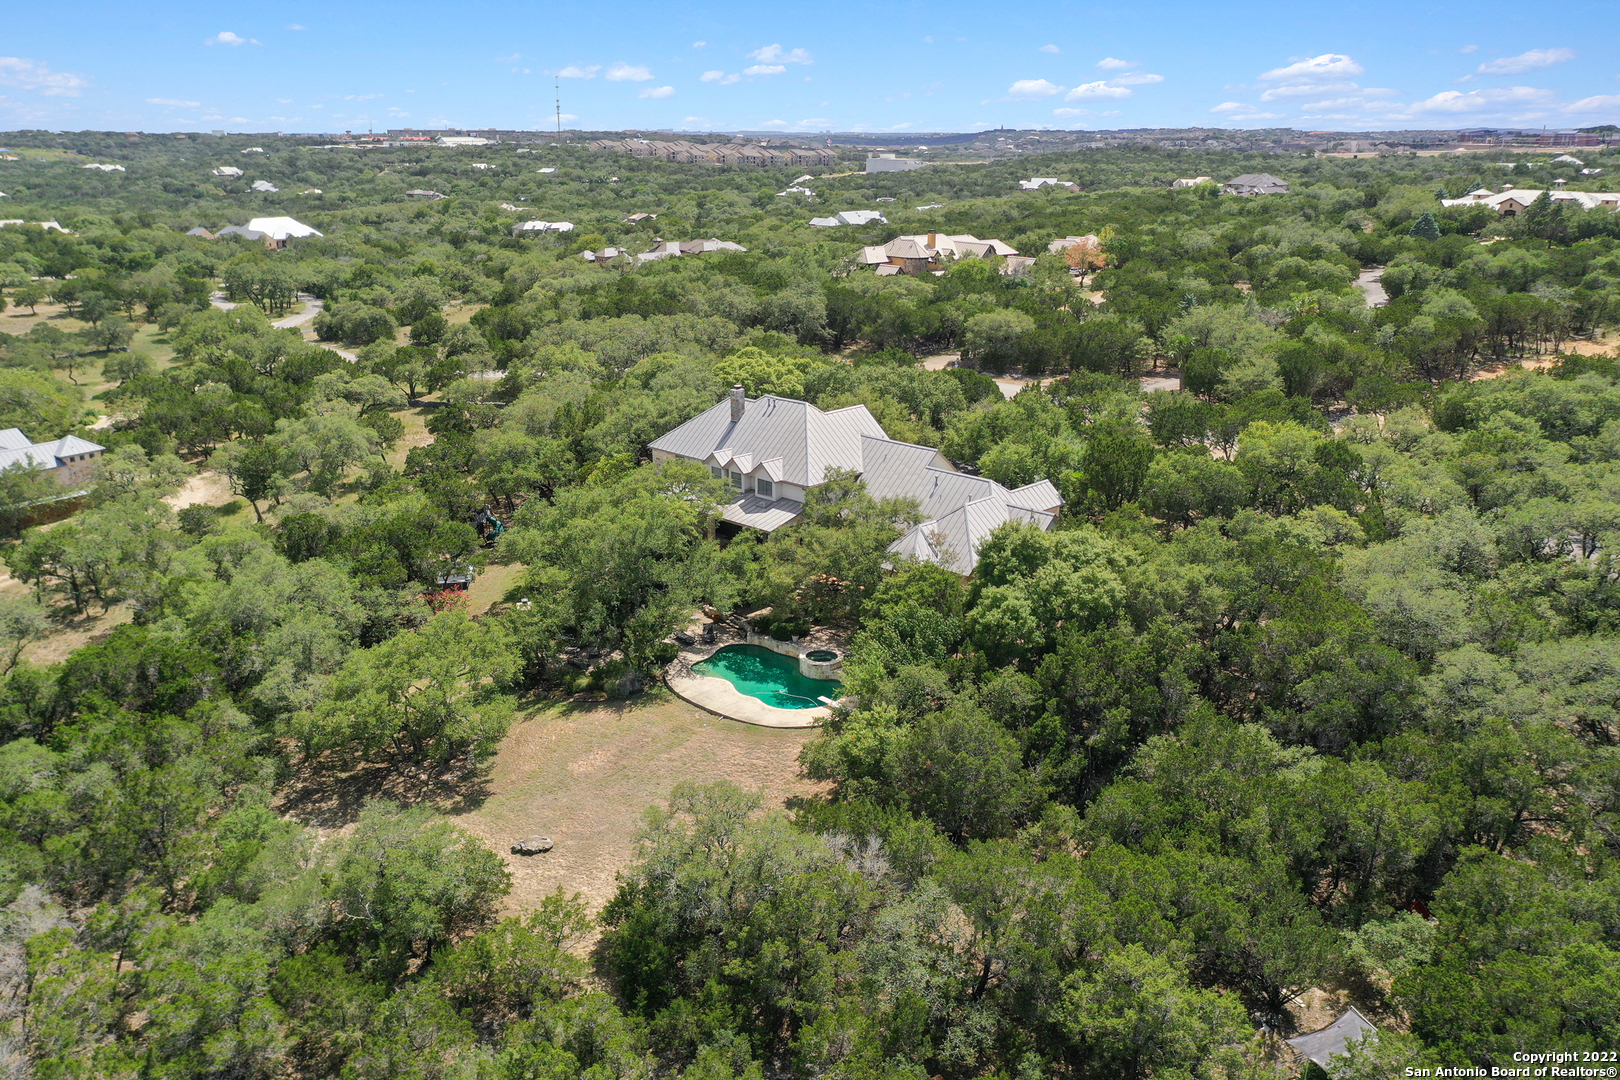 A Magnificent Texas Hill County Inspired Architectural Gem is a destination retreat ready to call home. Positioned on 2.78 acres in Guarded and Gated Sendero Ranch. Only 6 exits away from 281/1604 and just minutes from the airport. Beautiful windows and high ceilings welcome you at entry. Grand Gathering Family Room, Dining and Kitchen situated next to downstairs gameroom. Gourmet kitchen with large island, gas cooking, beautiful cabinetry opening to the family room and view to sprawling back yard and pool views. Spacious Master Suite w/luxurious master bath and dual closets. Everyone will be talking about the warm & inviting Hand Hewn log game room with fireplace and bar. Get ready to take your conversation to a whole other level. The Backyard is your oasis of peace providing privacy, lots of trees, space to run, pool, spa, fireplace and large covered patio with outdoor kitchen. It's ready for you to unwind and call it home.